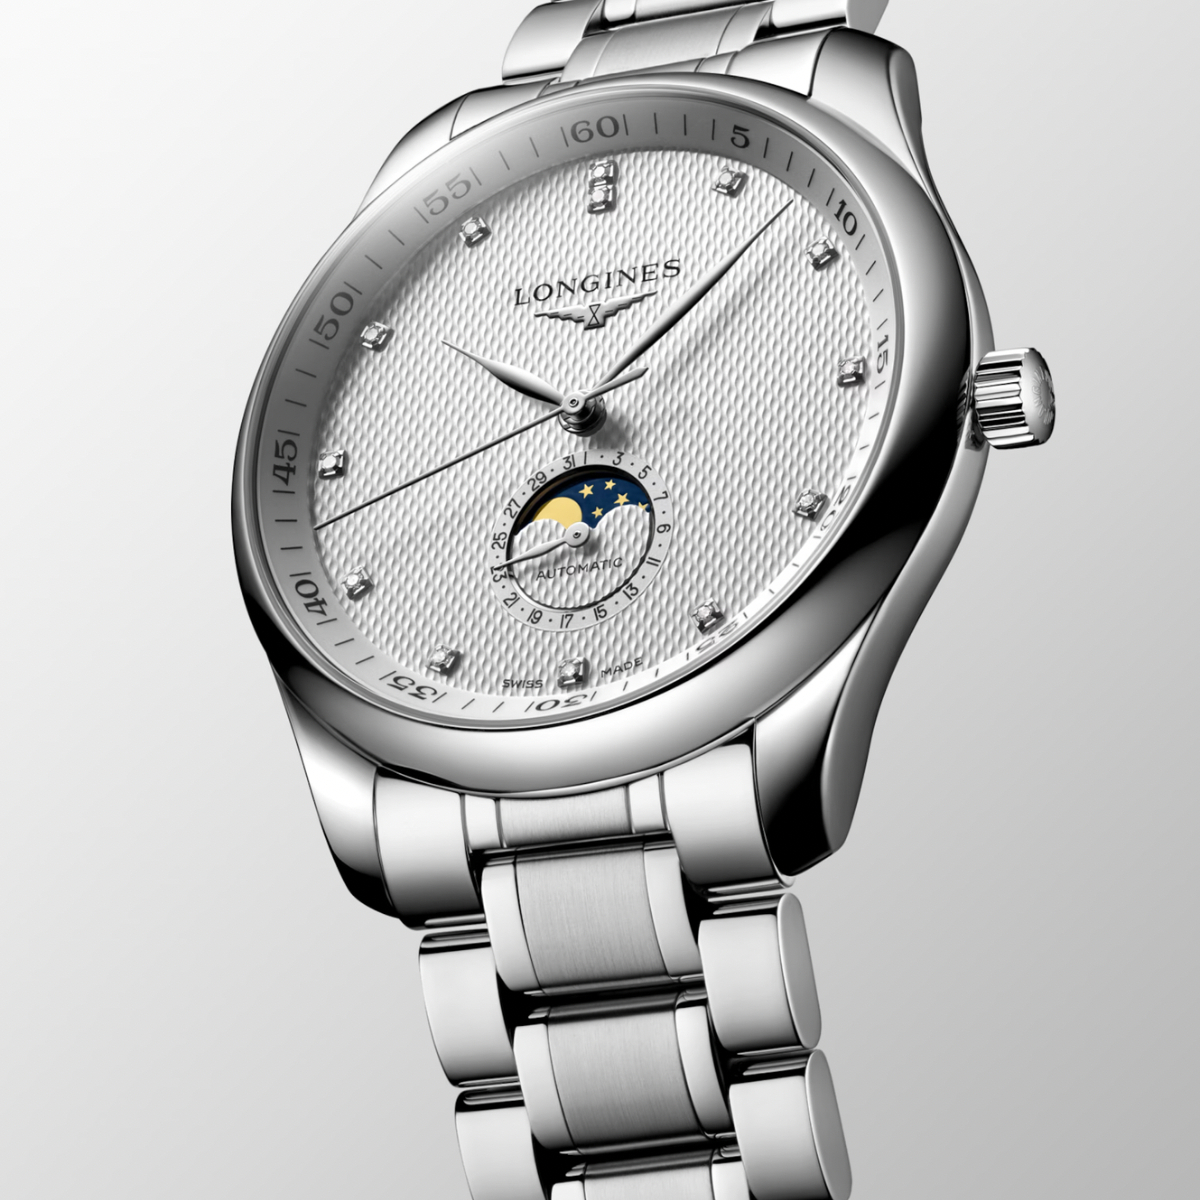 [BNIB] LONGINES MASTER COLLECTION MOONPHASE DIAMOND DIAL AUTOMATIC 42MM *L2.919.4.77.6*